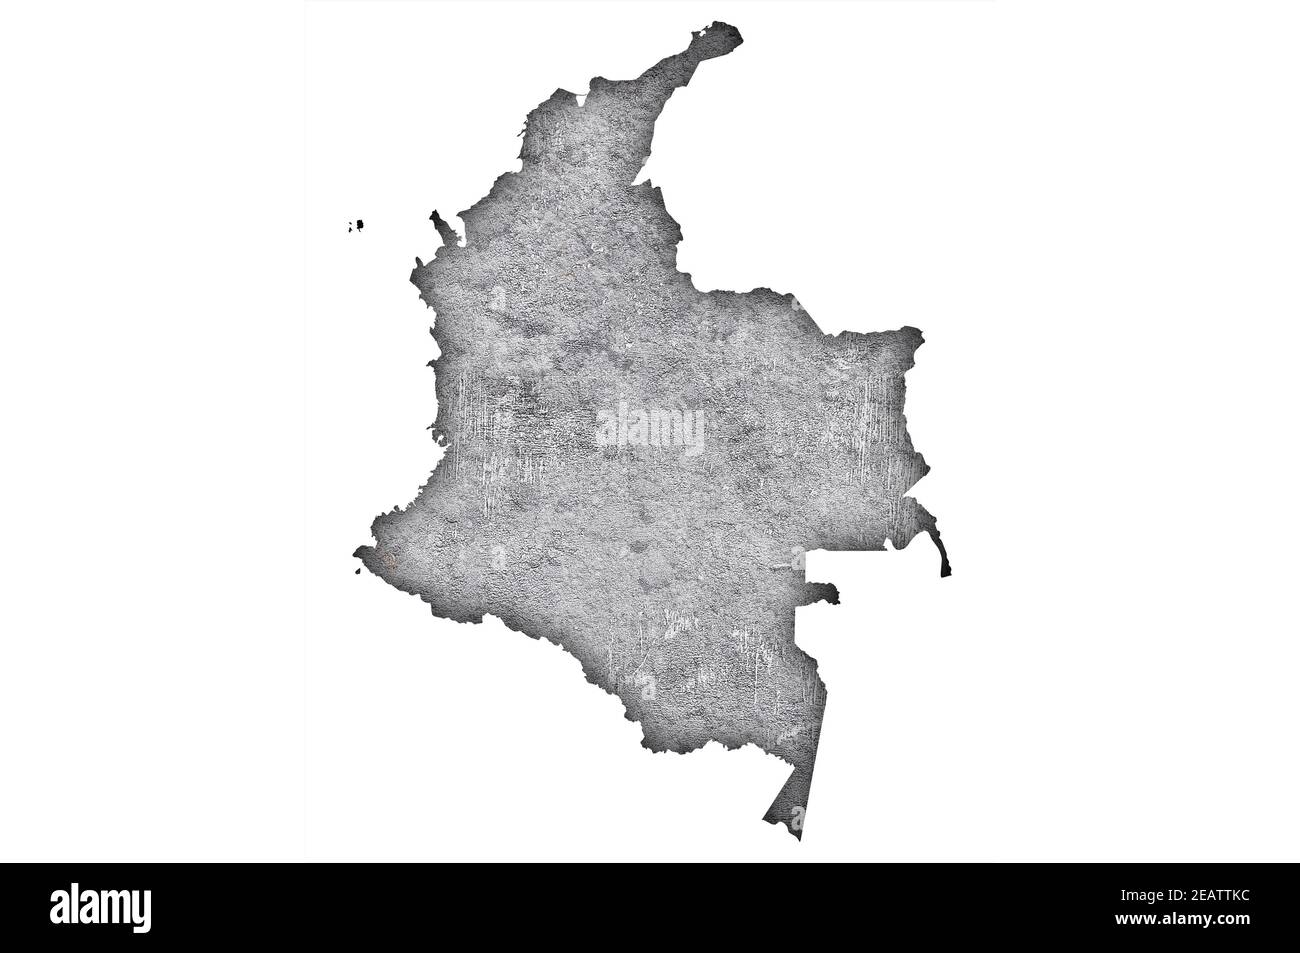 Map of Colombia on weathered concrete Stock Photo